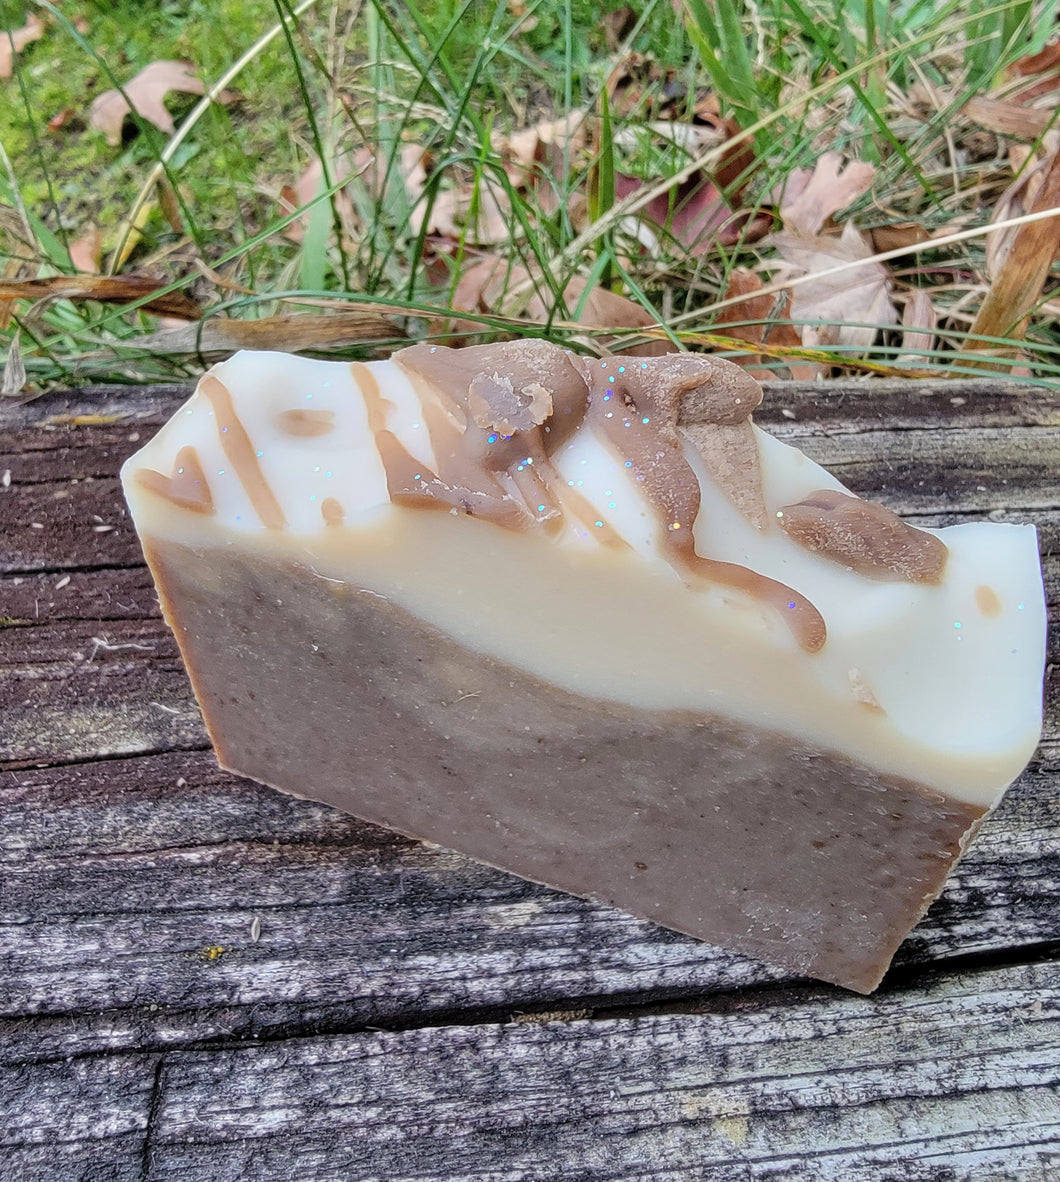 Chocolate colored soap with a white top and chocolate drizzle with glitter sitting on a ledge with grass and leaves in the background.